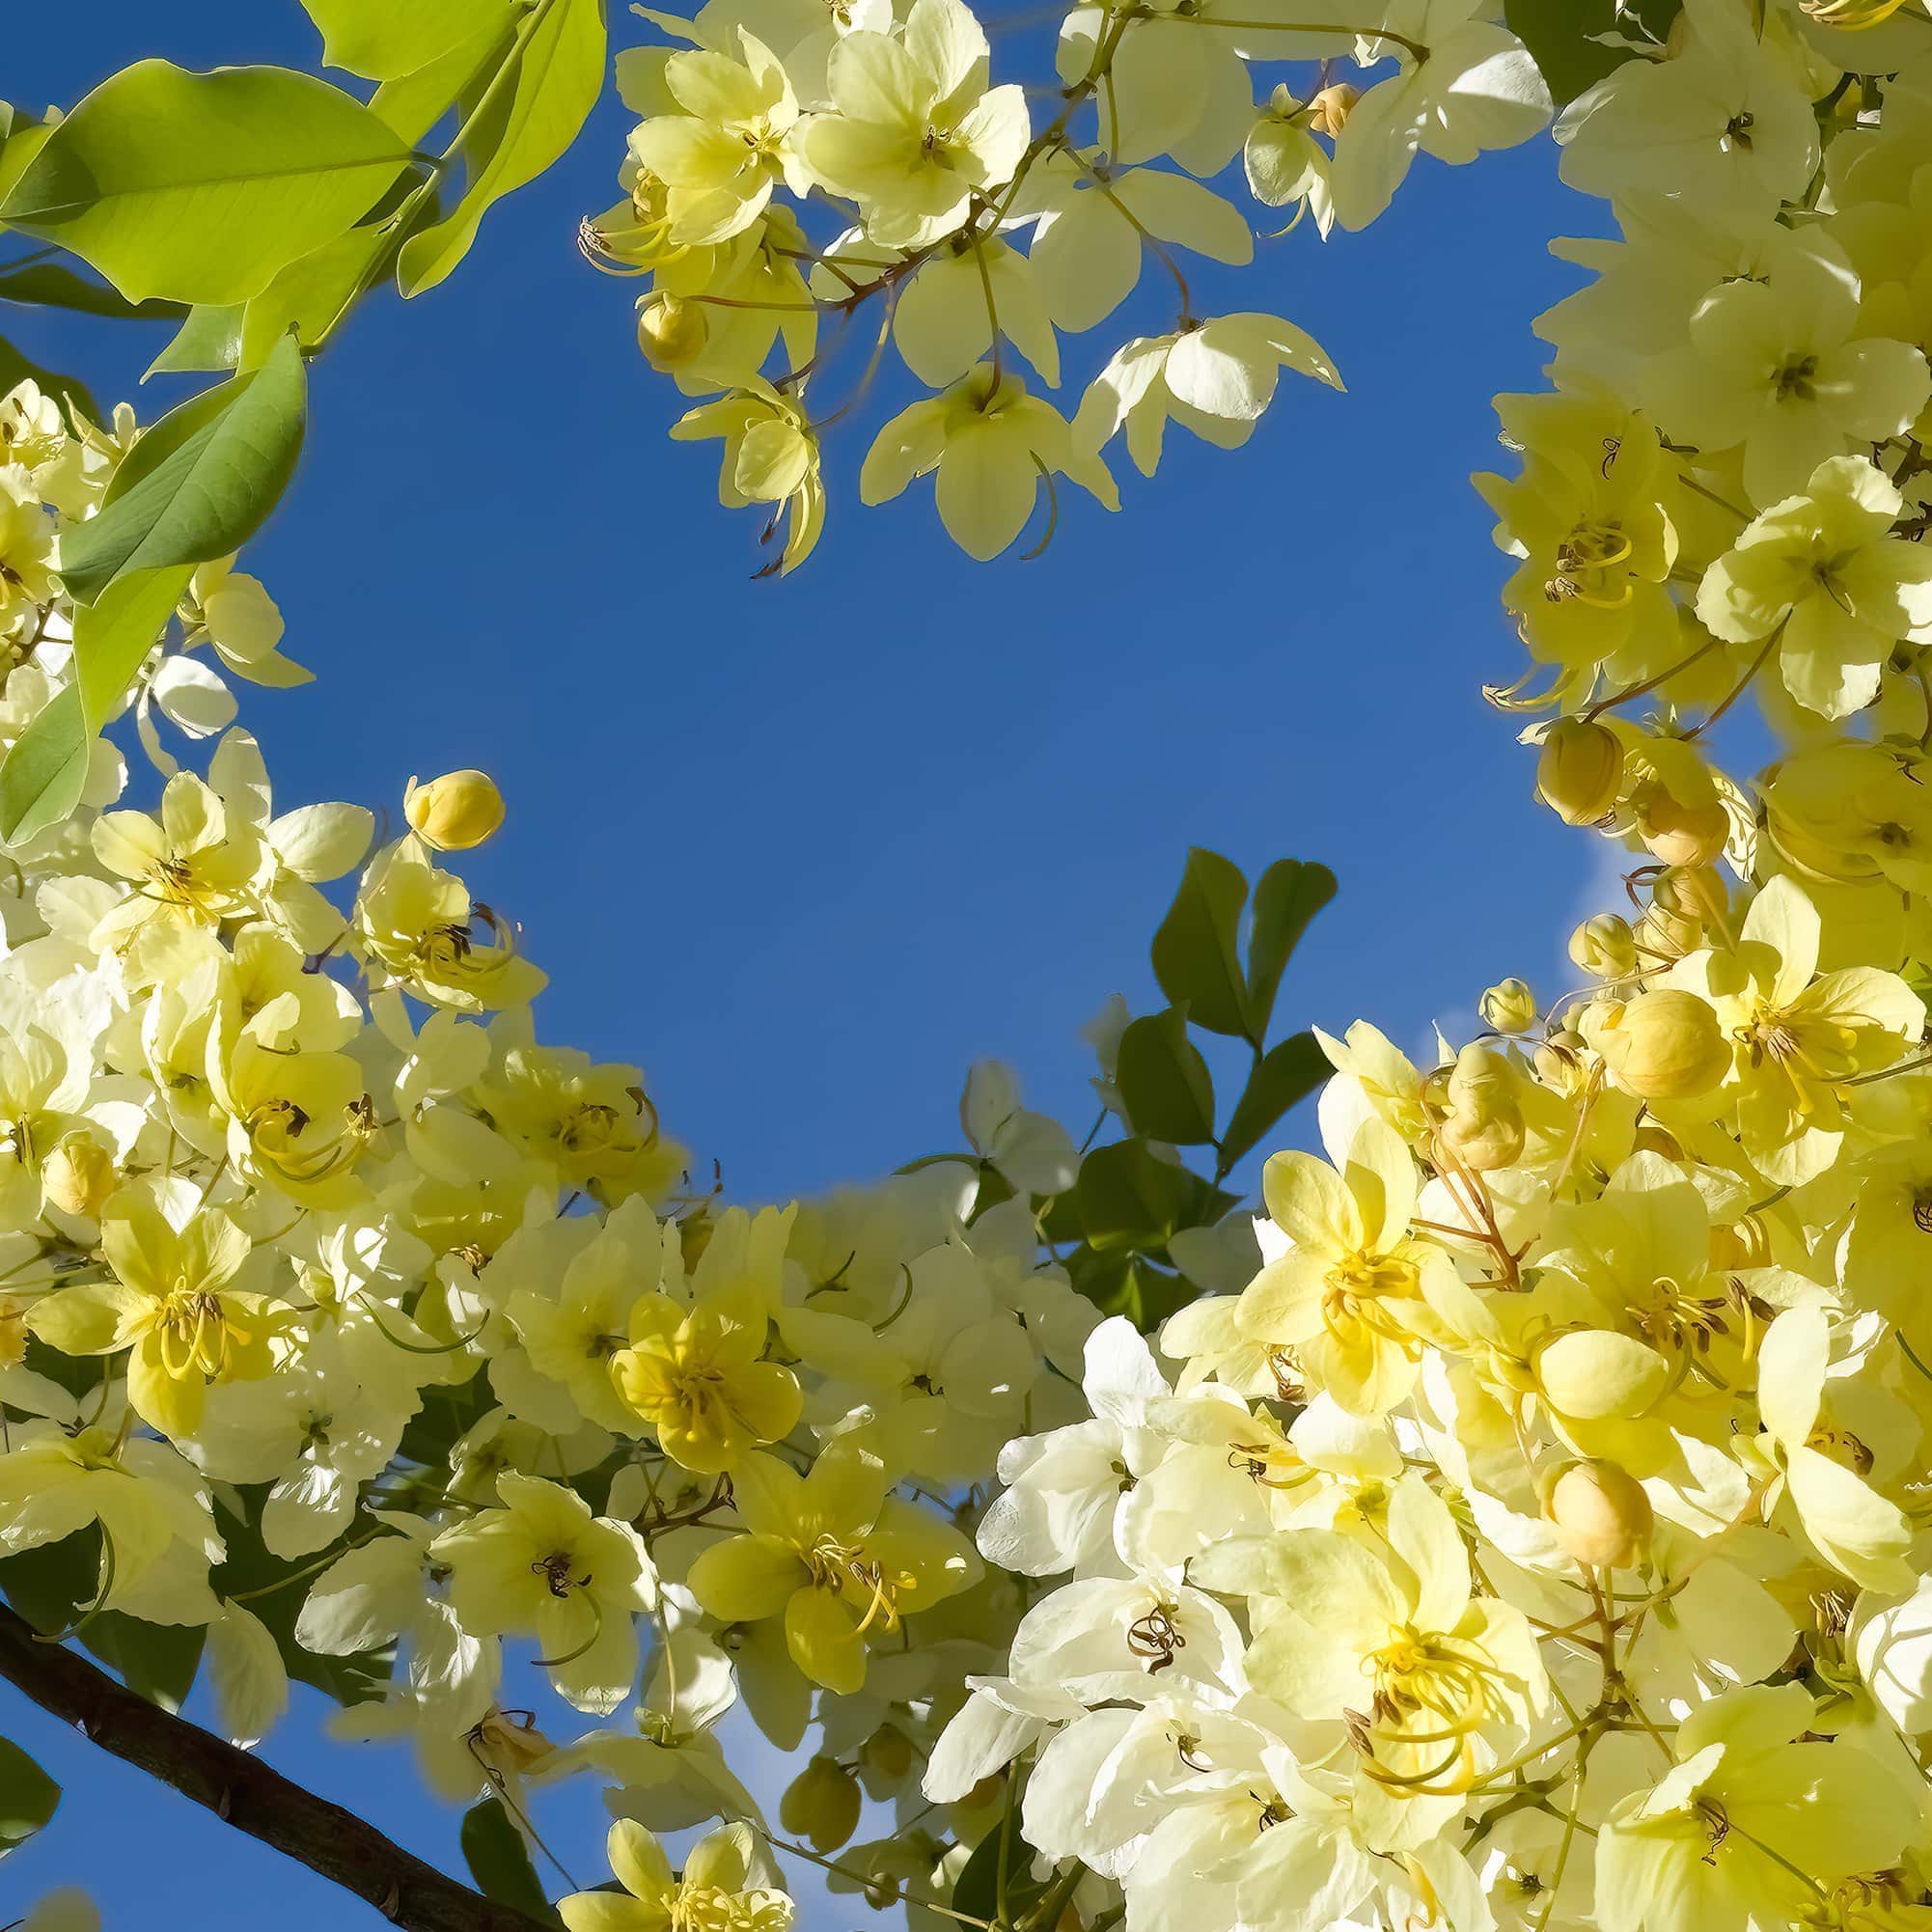 golden shower tree, flowers with sky